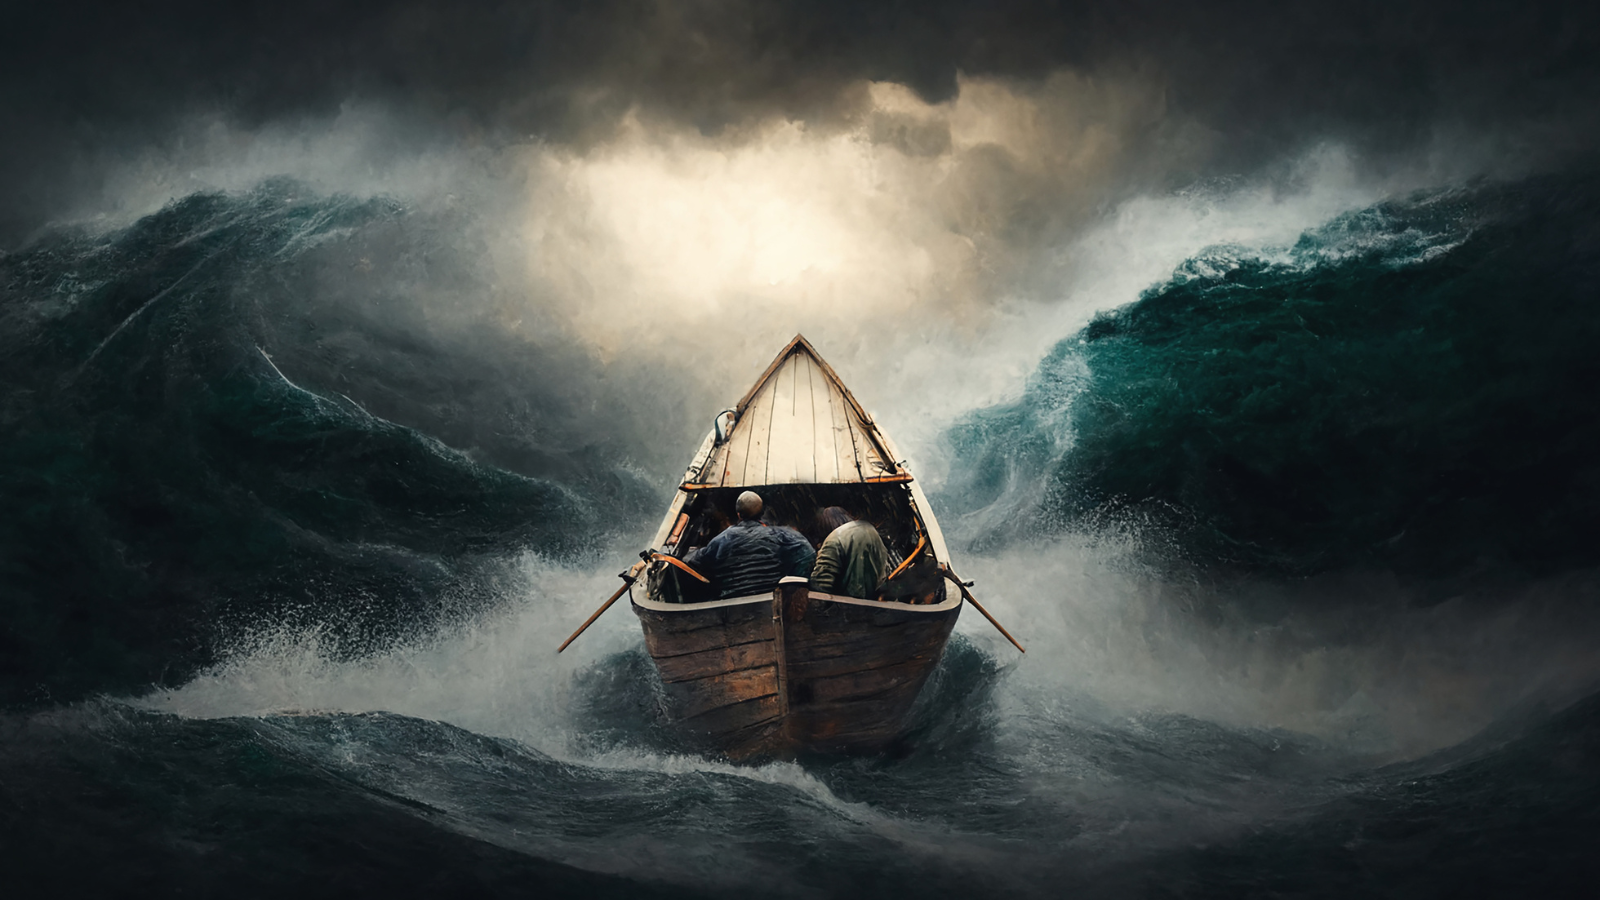 A boat in a storm.